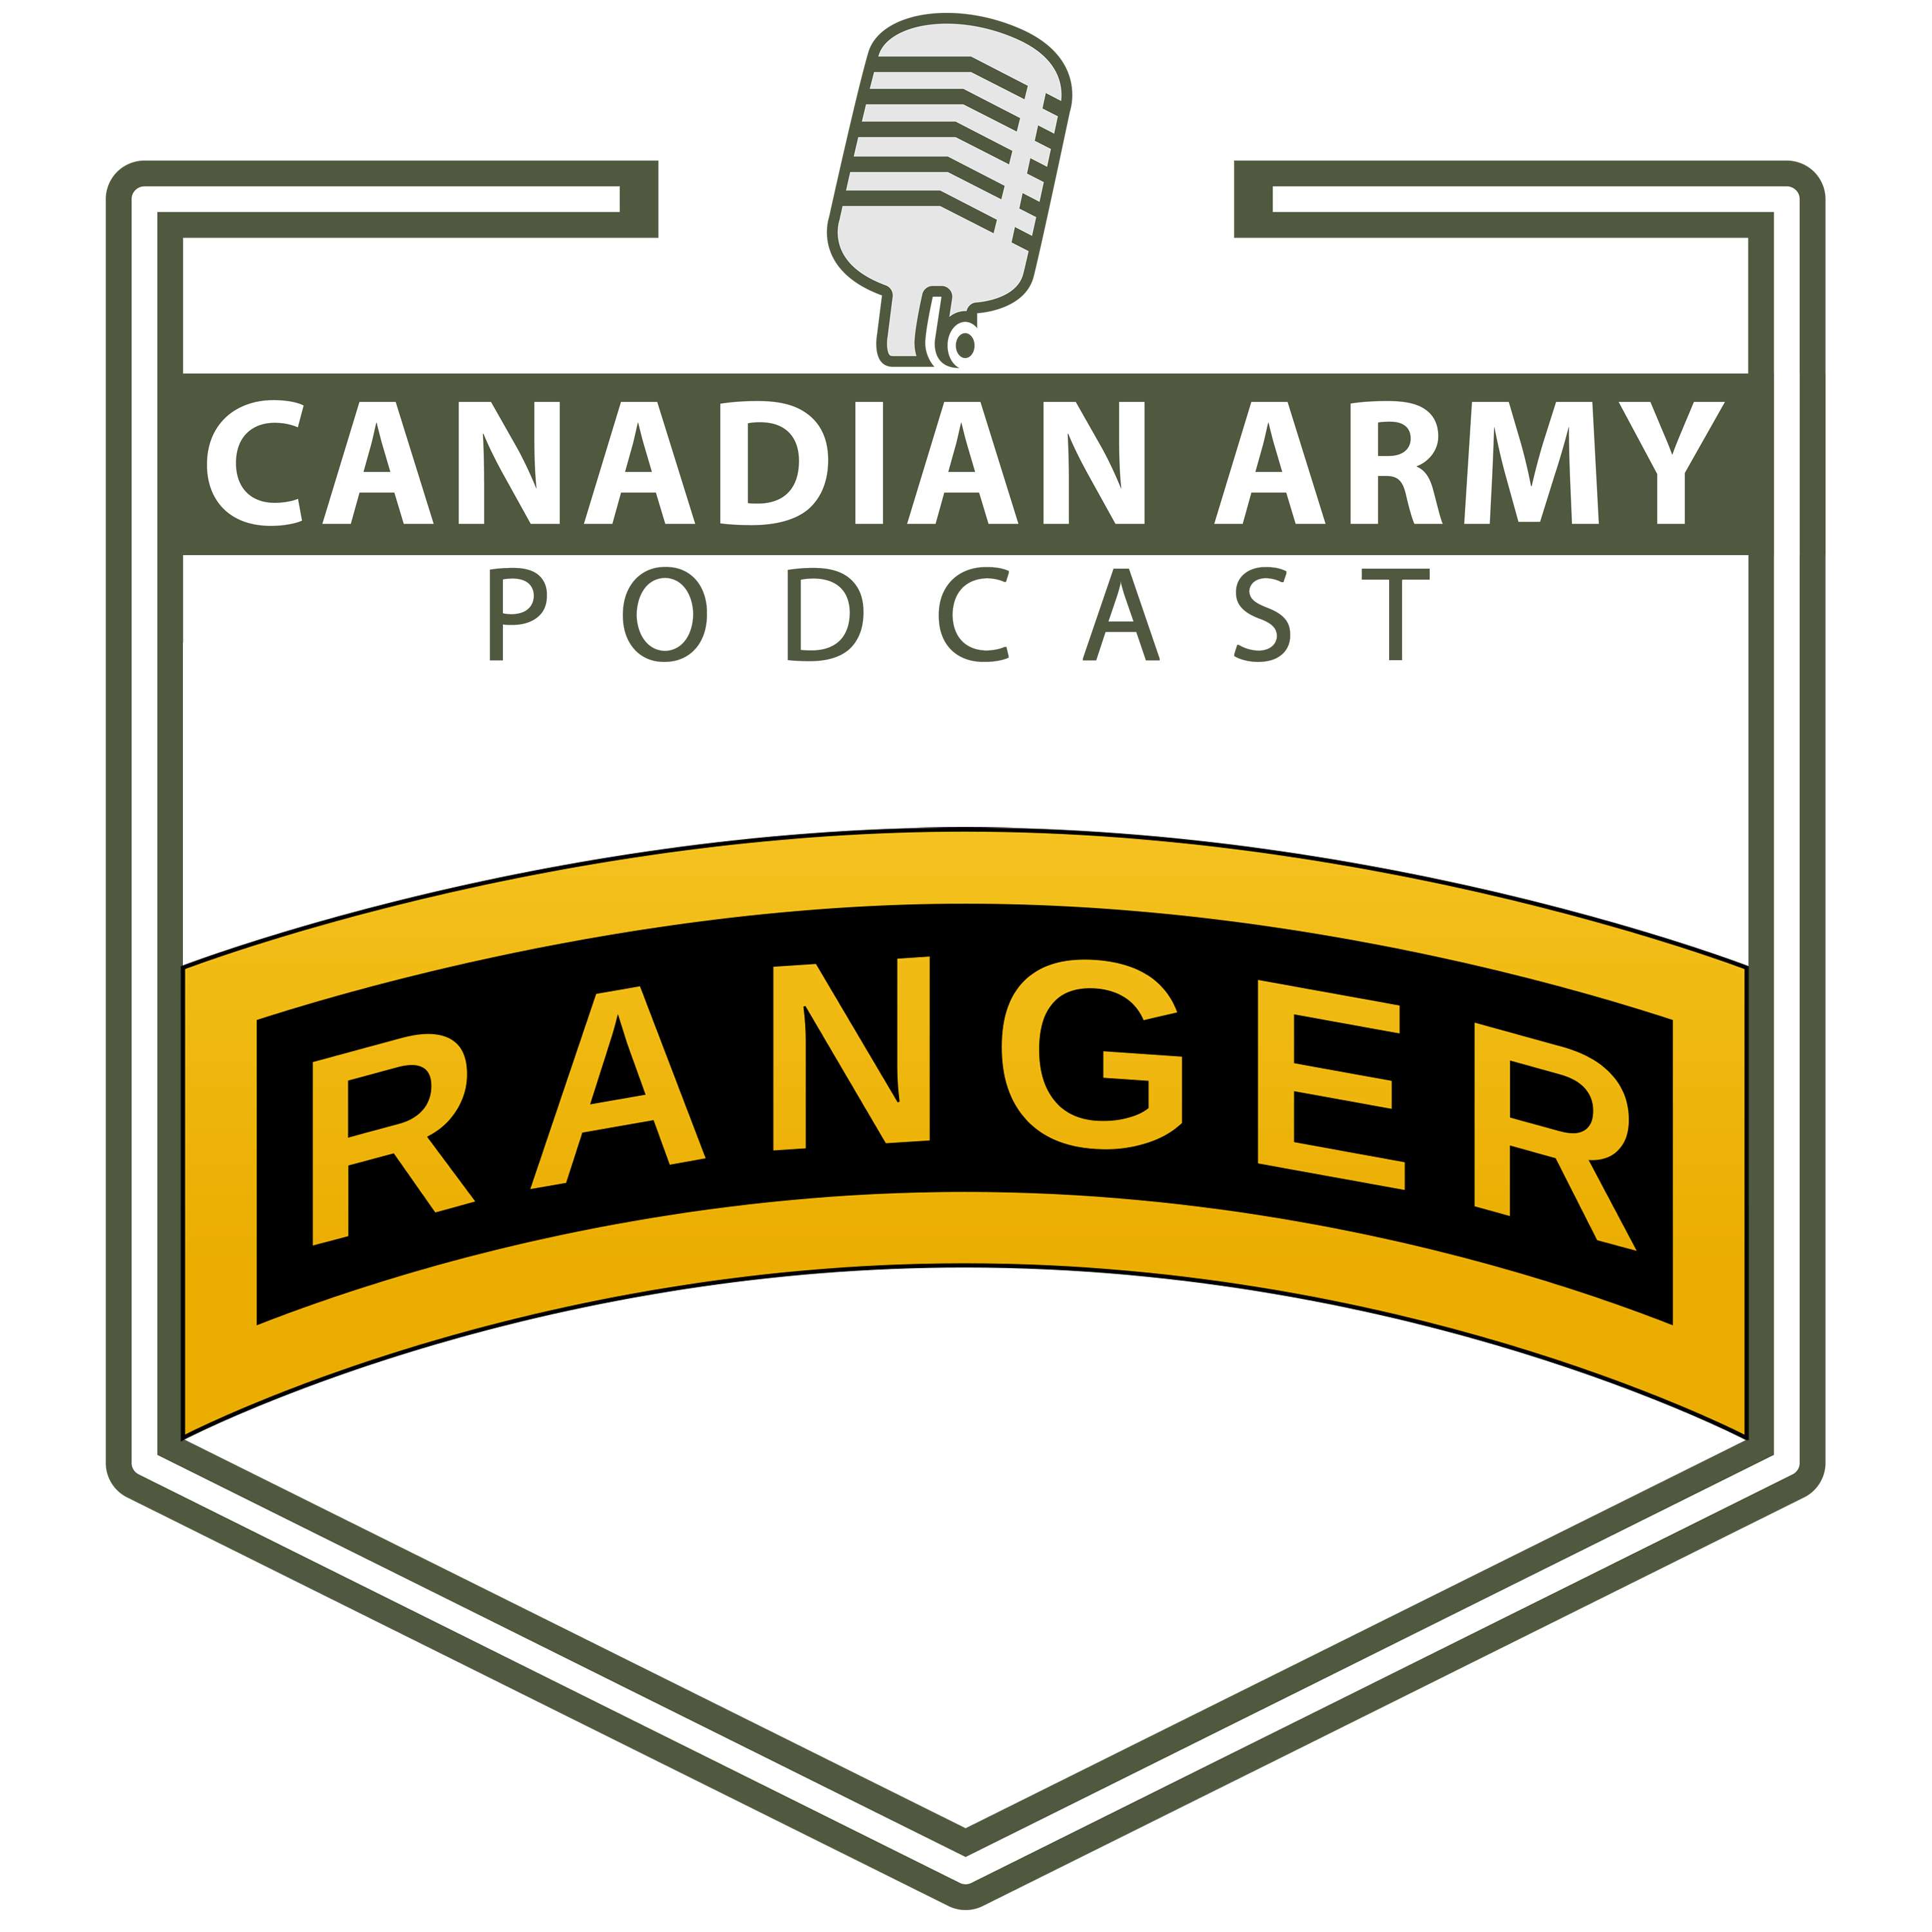 U.S. Army Ranger School: A Canadian Perspective (S4 E4)